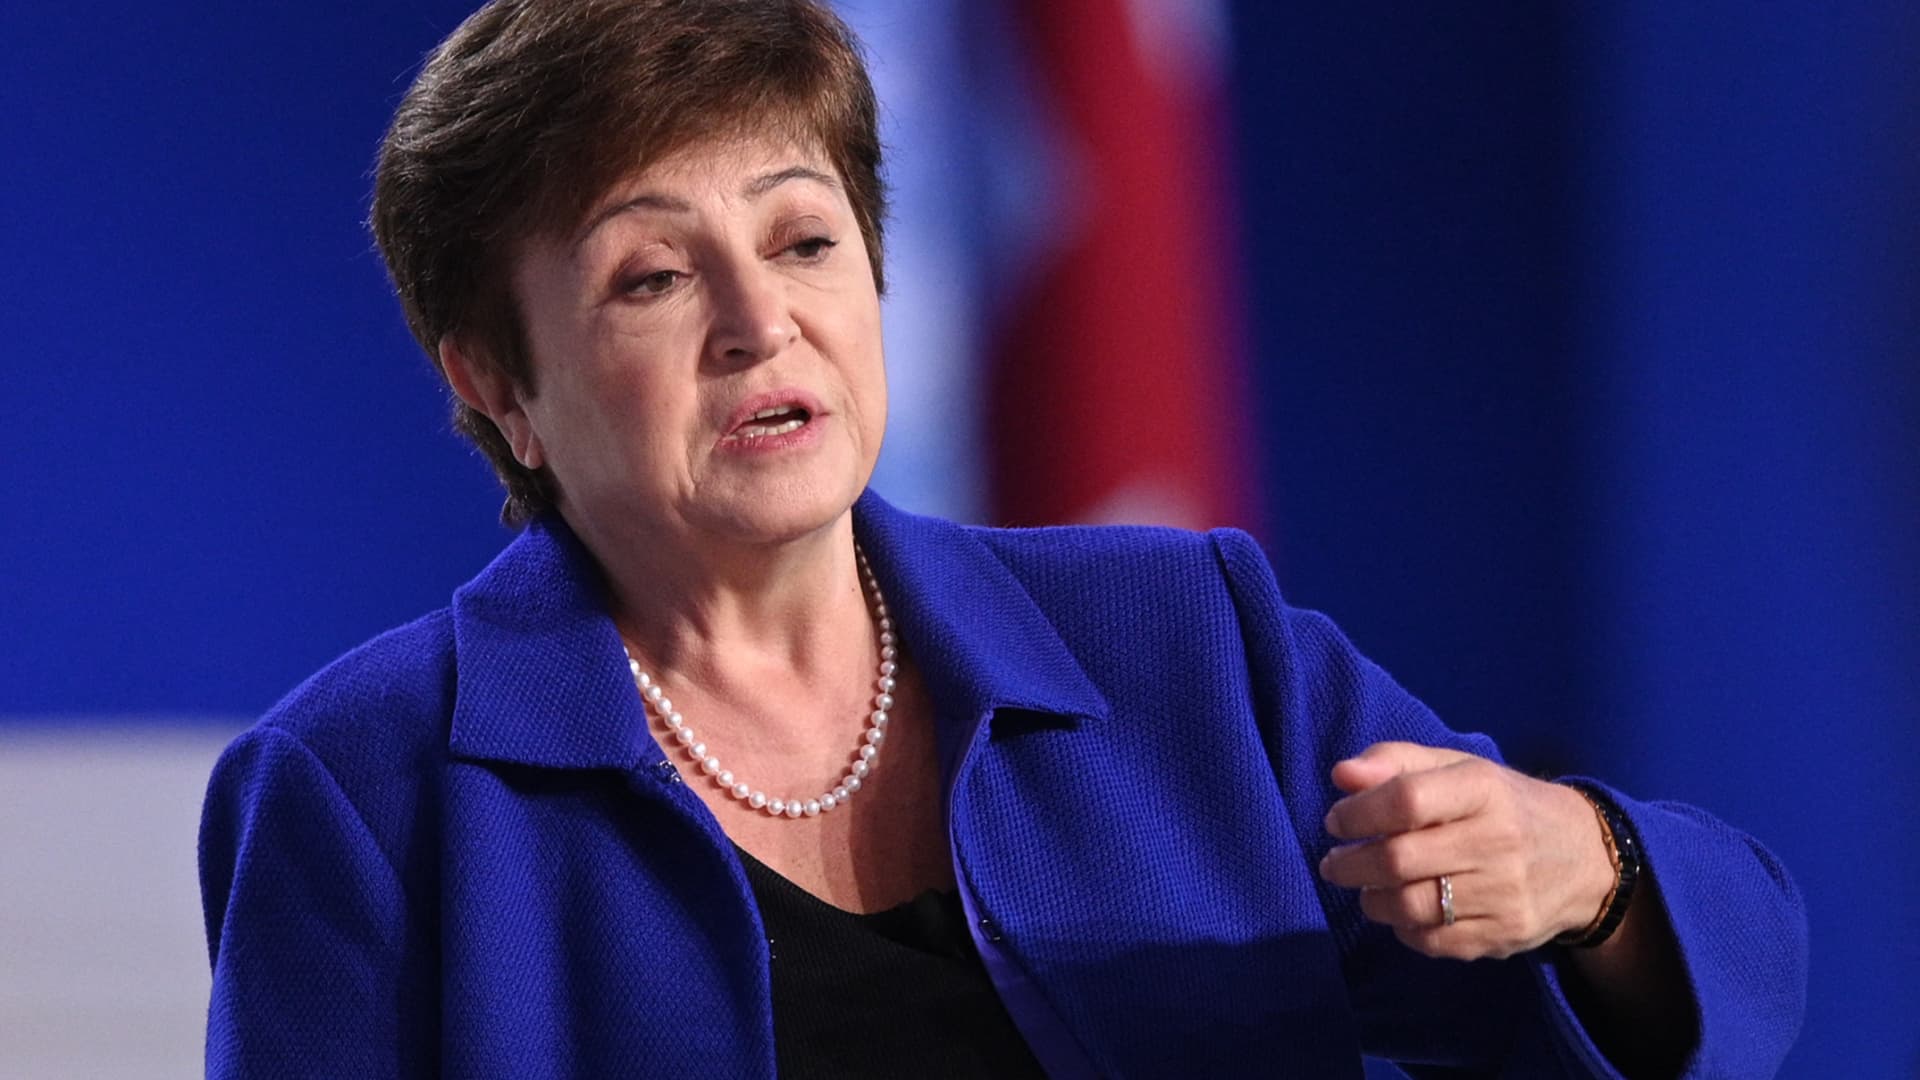 IMF managing director Kristalina Georgieva speaks during a panel discussion at the COP26 UN Climate Summit in Glasgow on November 3, 2021.